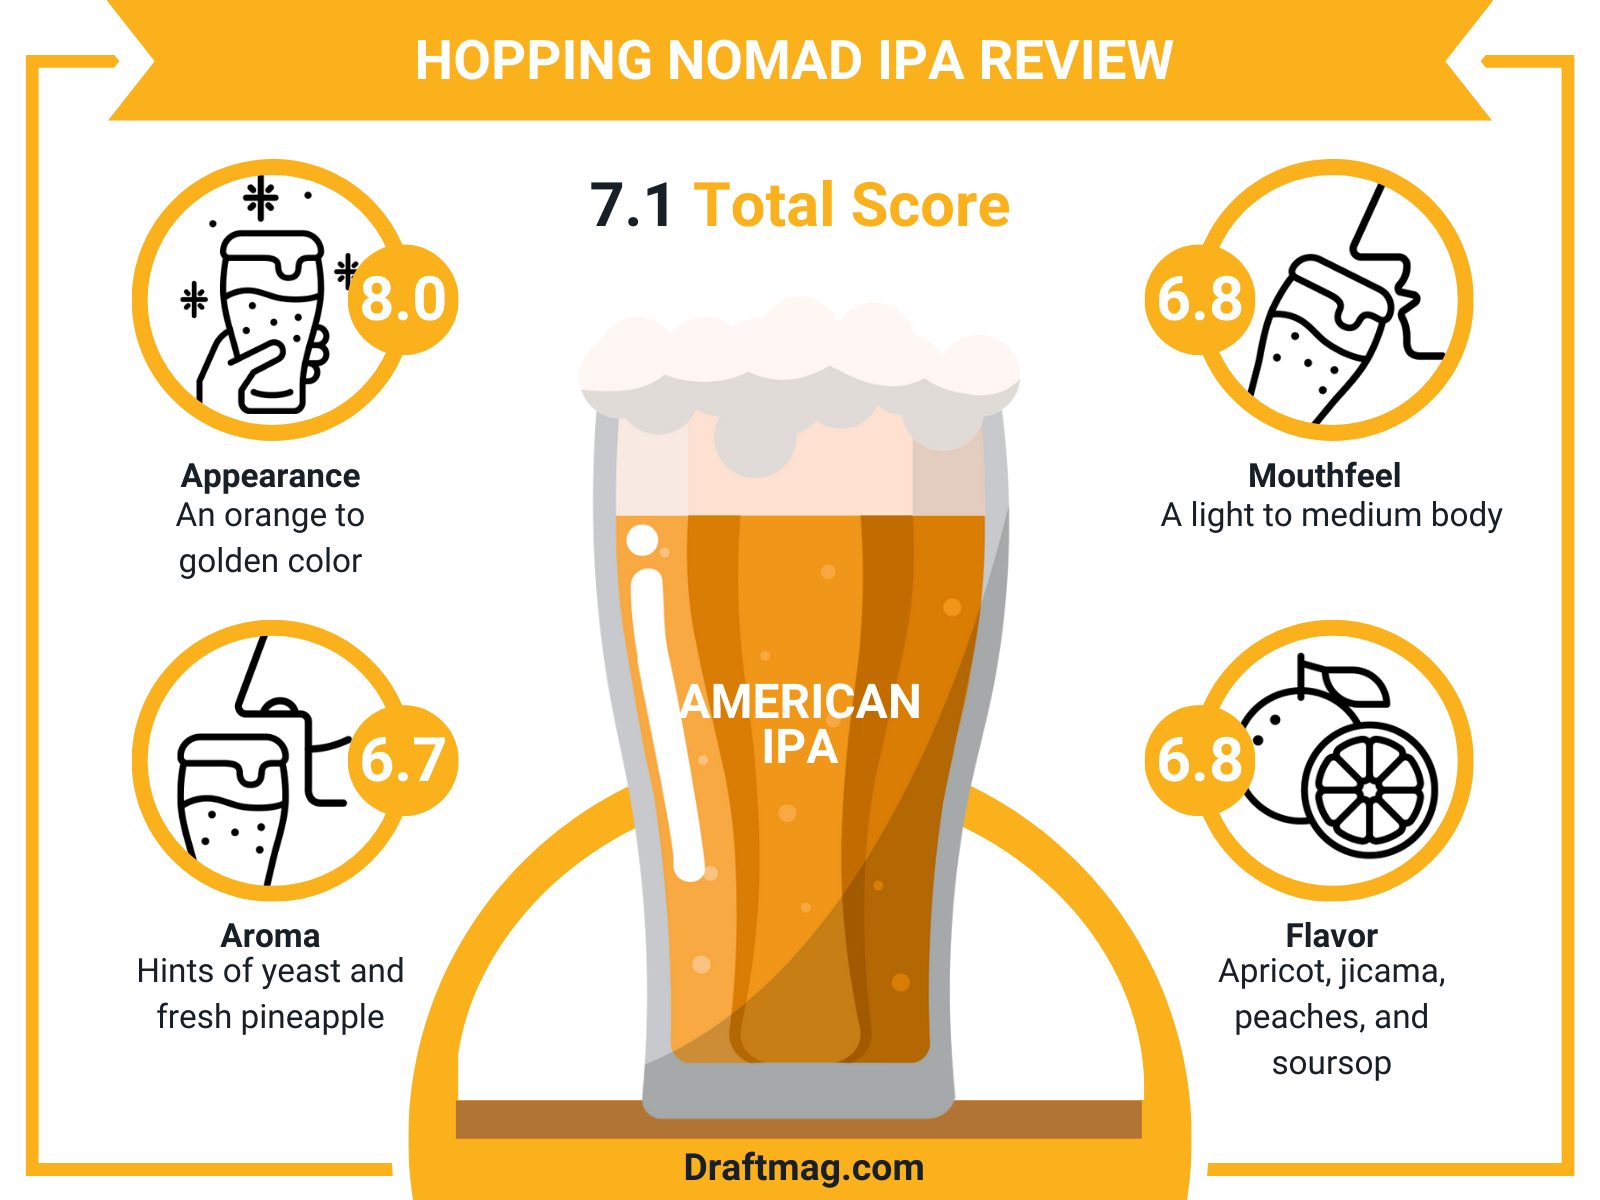 Hopping Nomad IPA Review Infographic